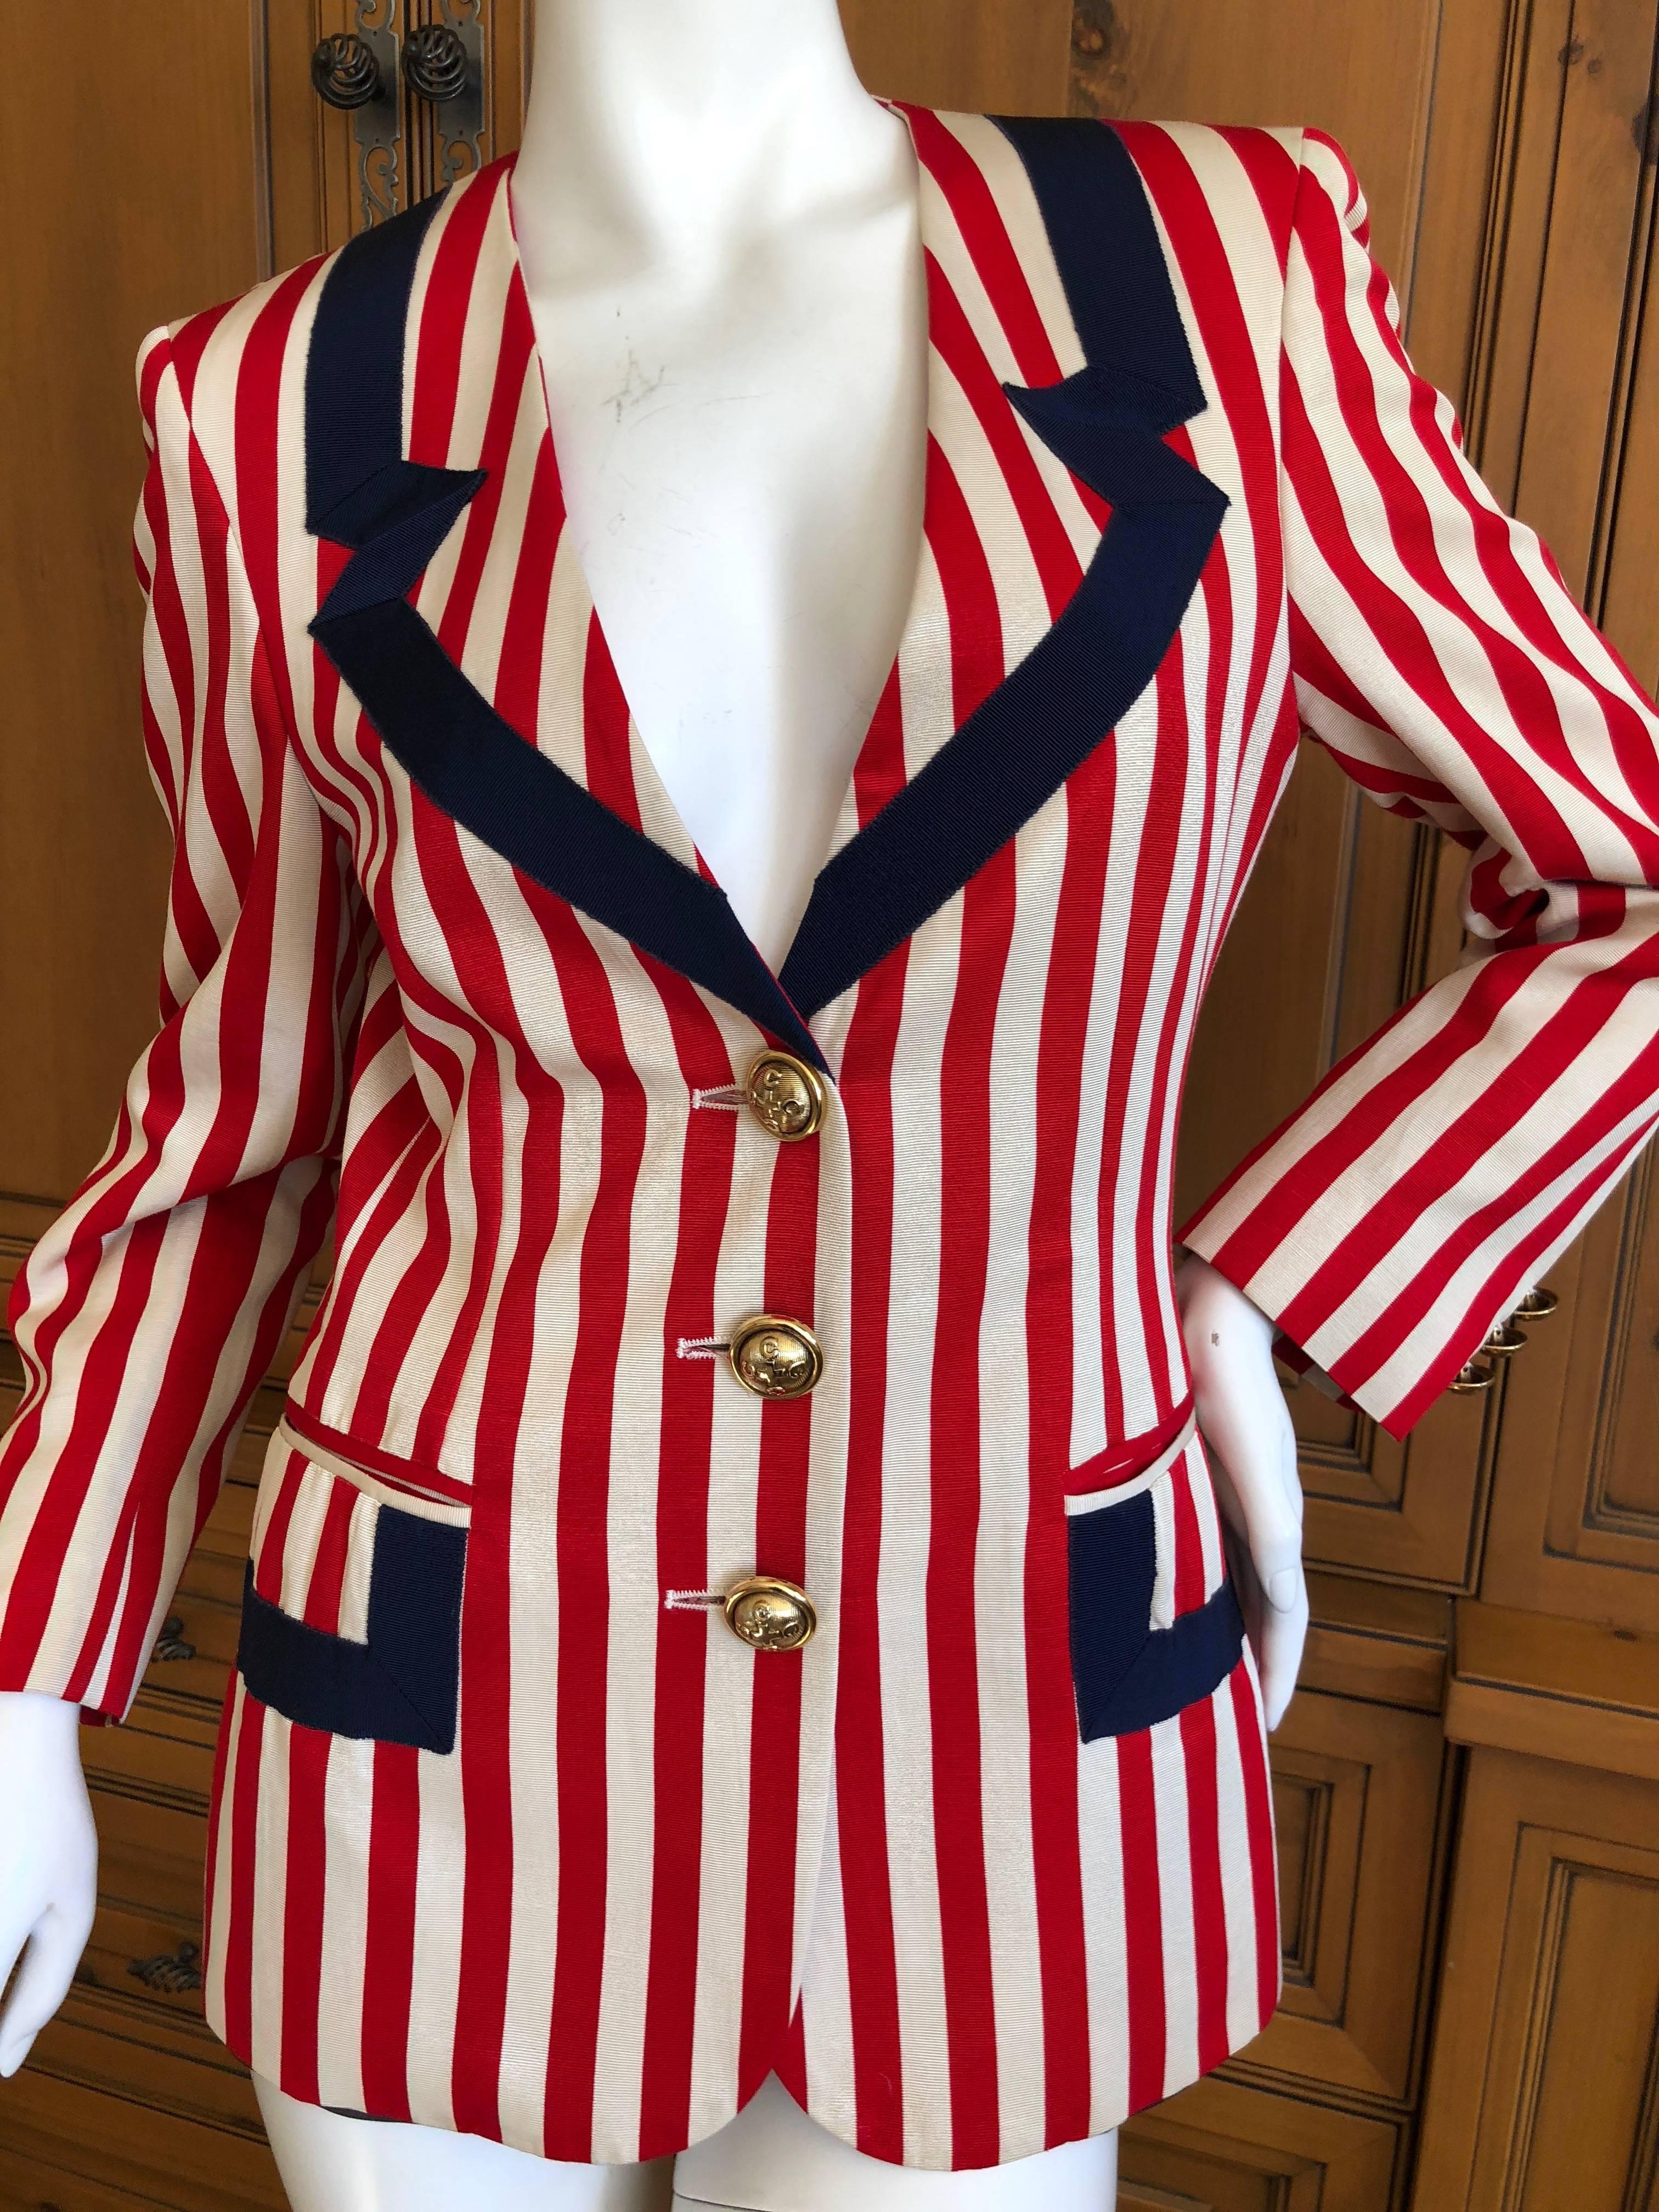 Wonderful red white and blue  jacket from Moschino from the 1993 collecton from Cheap and Chic.
Contrasting red, white and blue, made with  grosgrain ribbon tromp l'ceil details .
Size 6
Bust 36